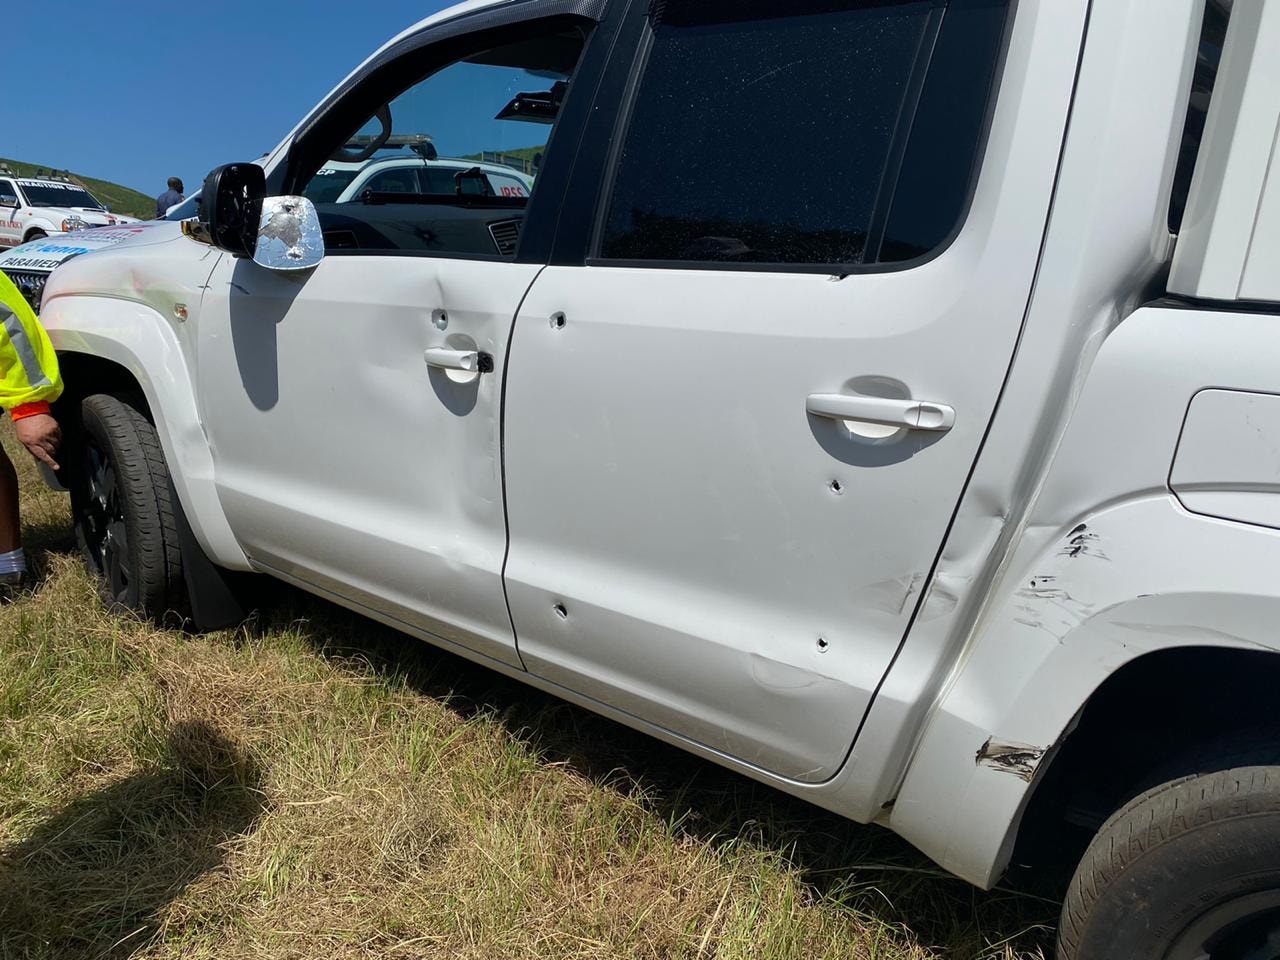 House robber killed in a shootout on the N2